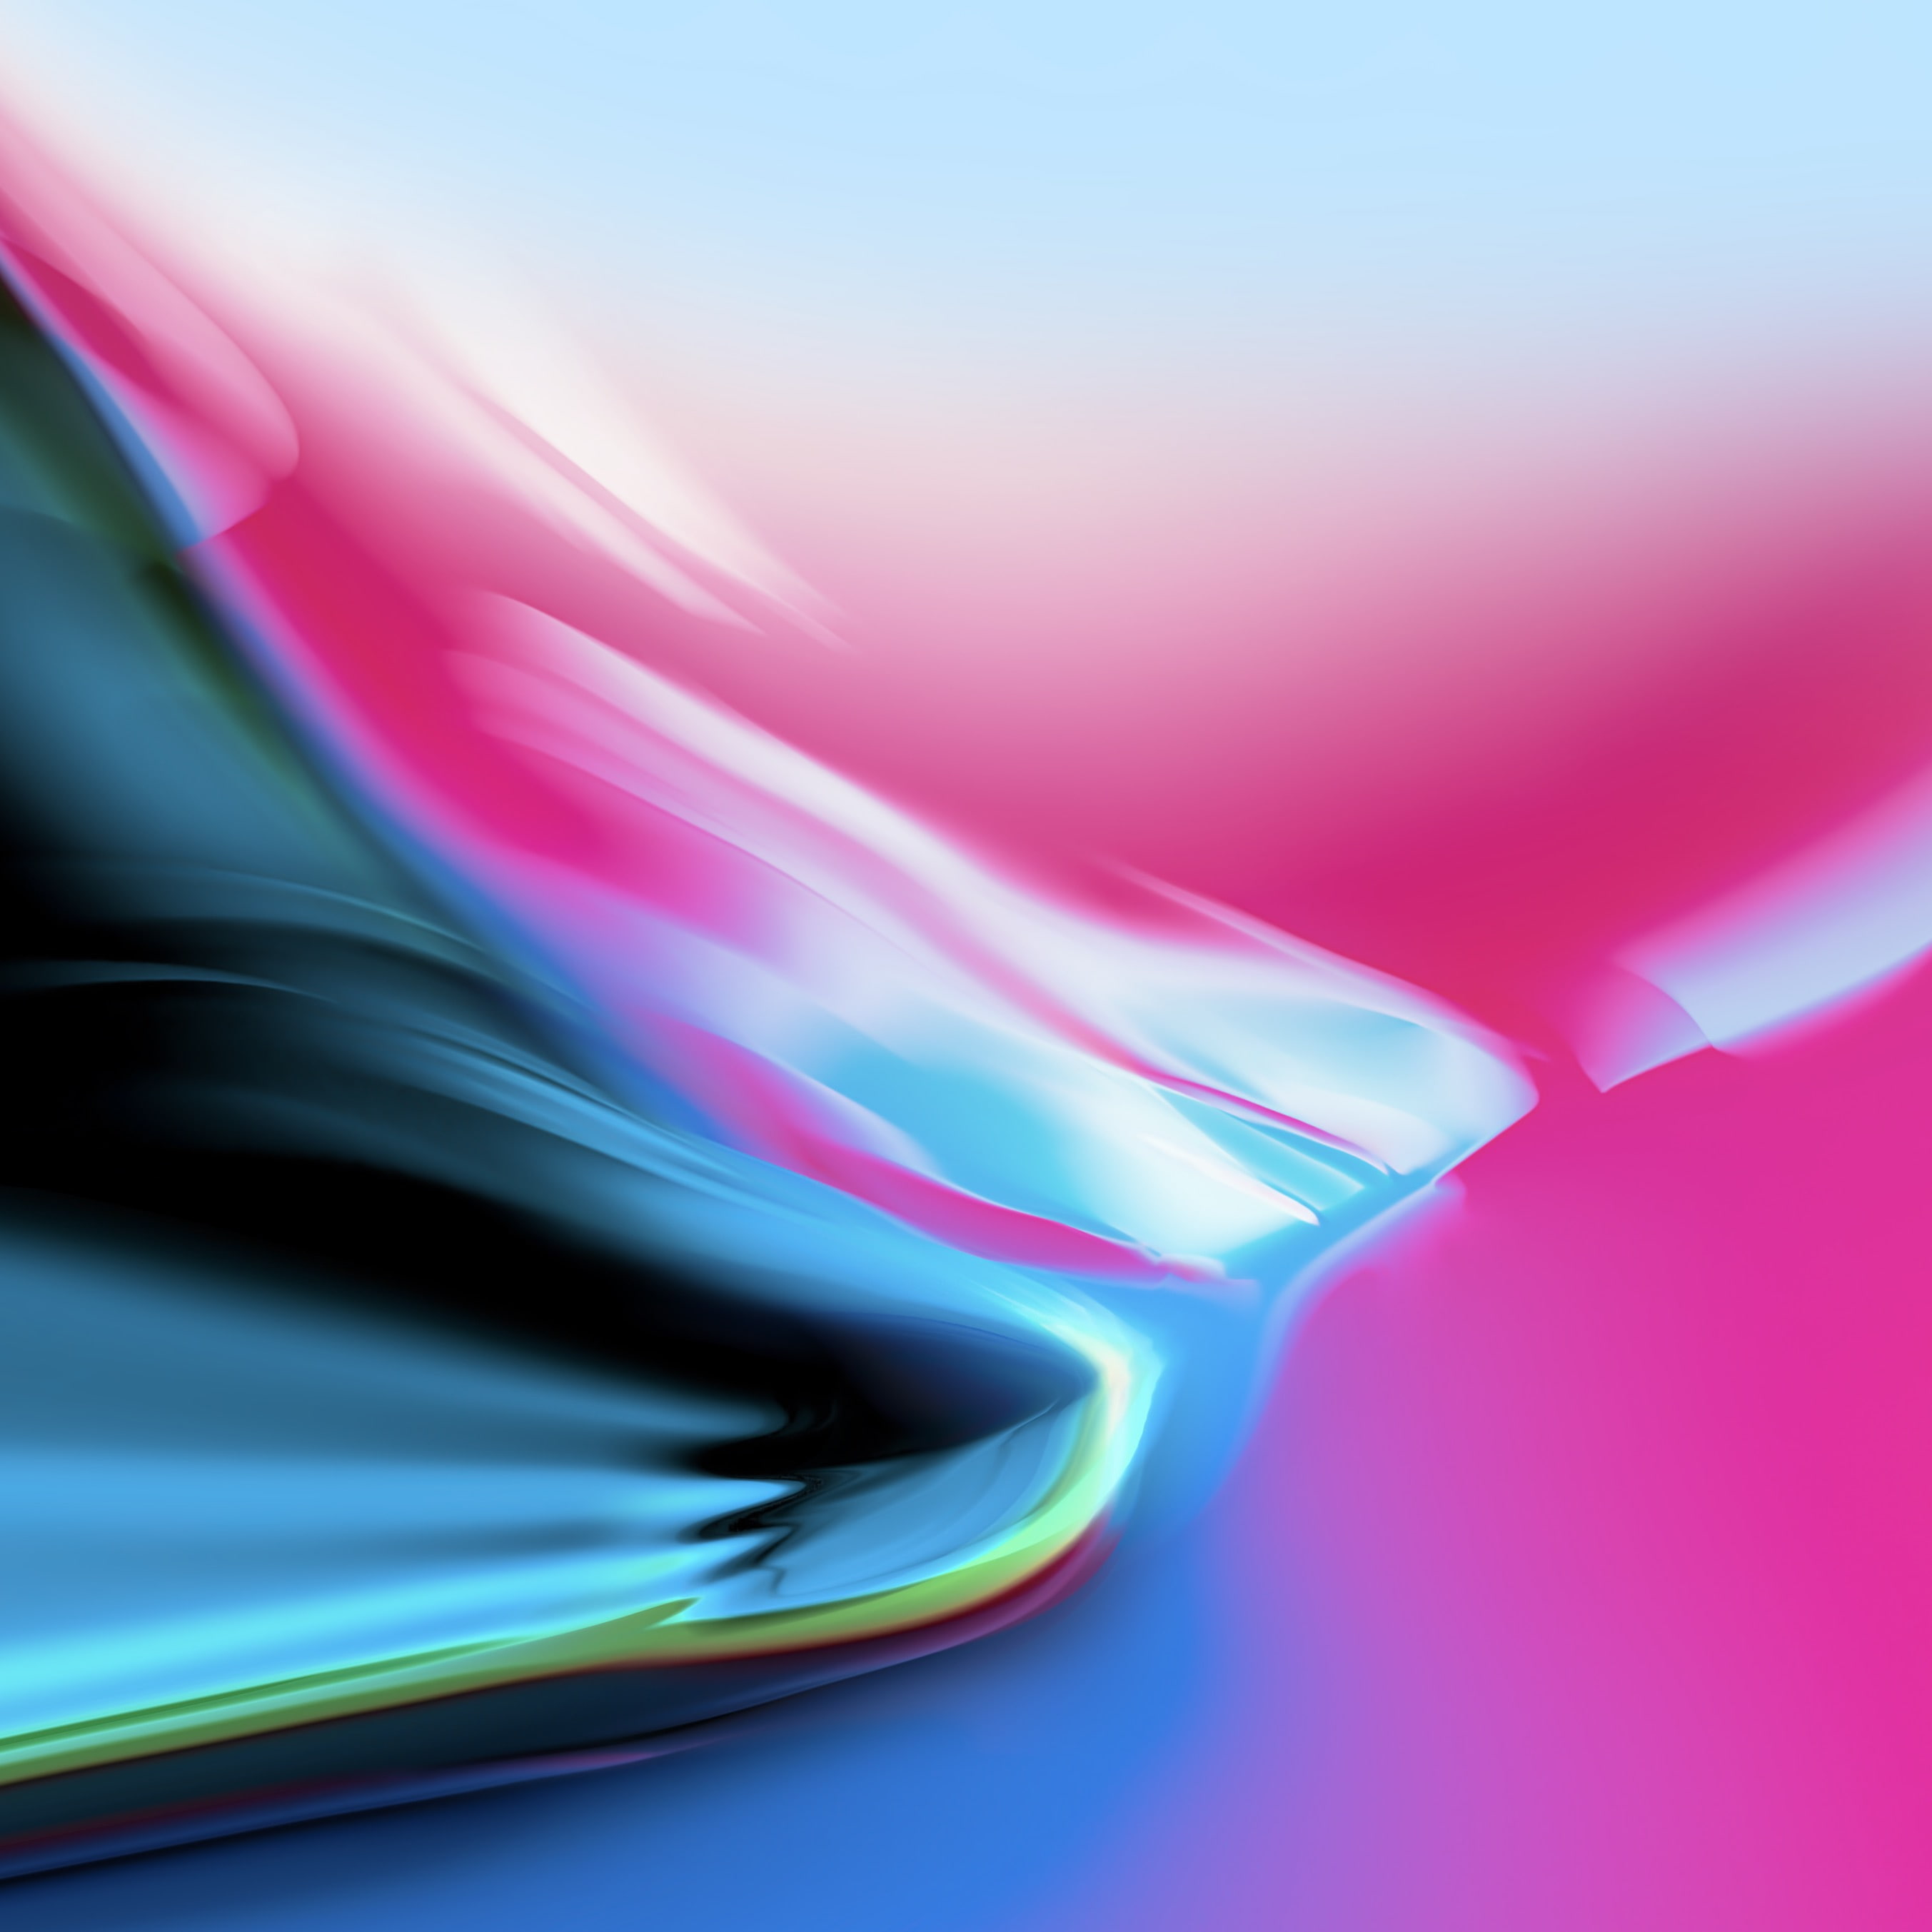 ios11, apple, abstract, hd, iphone 8, iphone x, motion, blurred motion